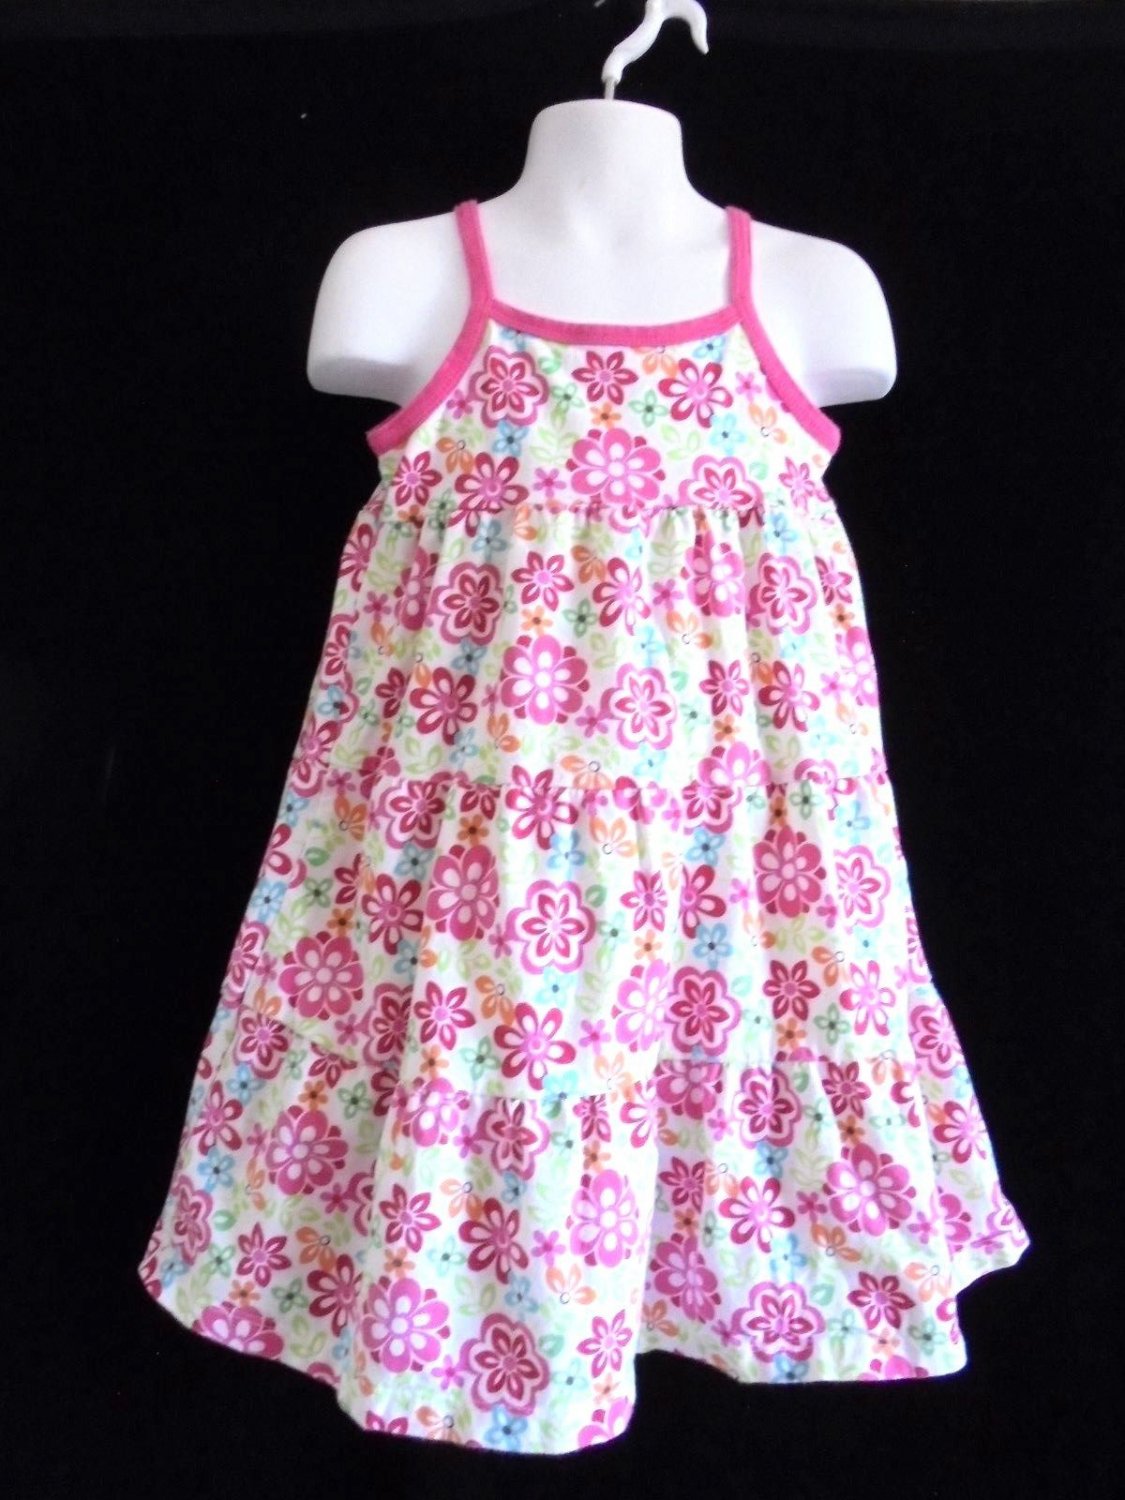 Jumping Beans - Floral Tiered Dress w/Pink Trim Girls Size 5 Nice!